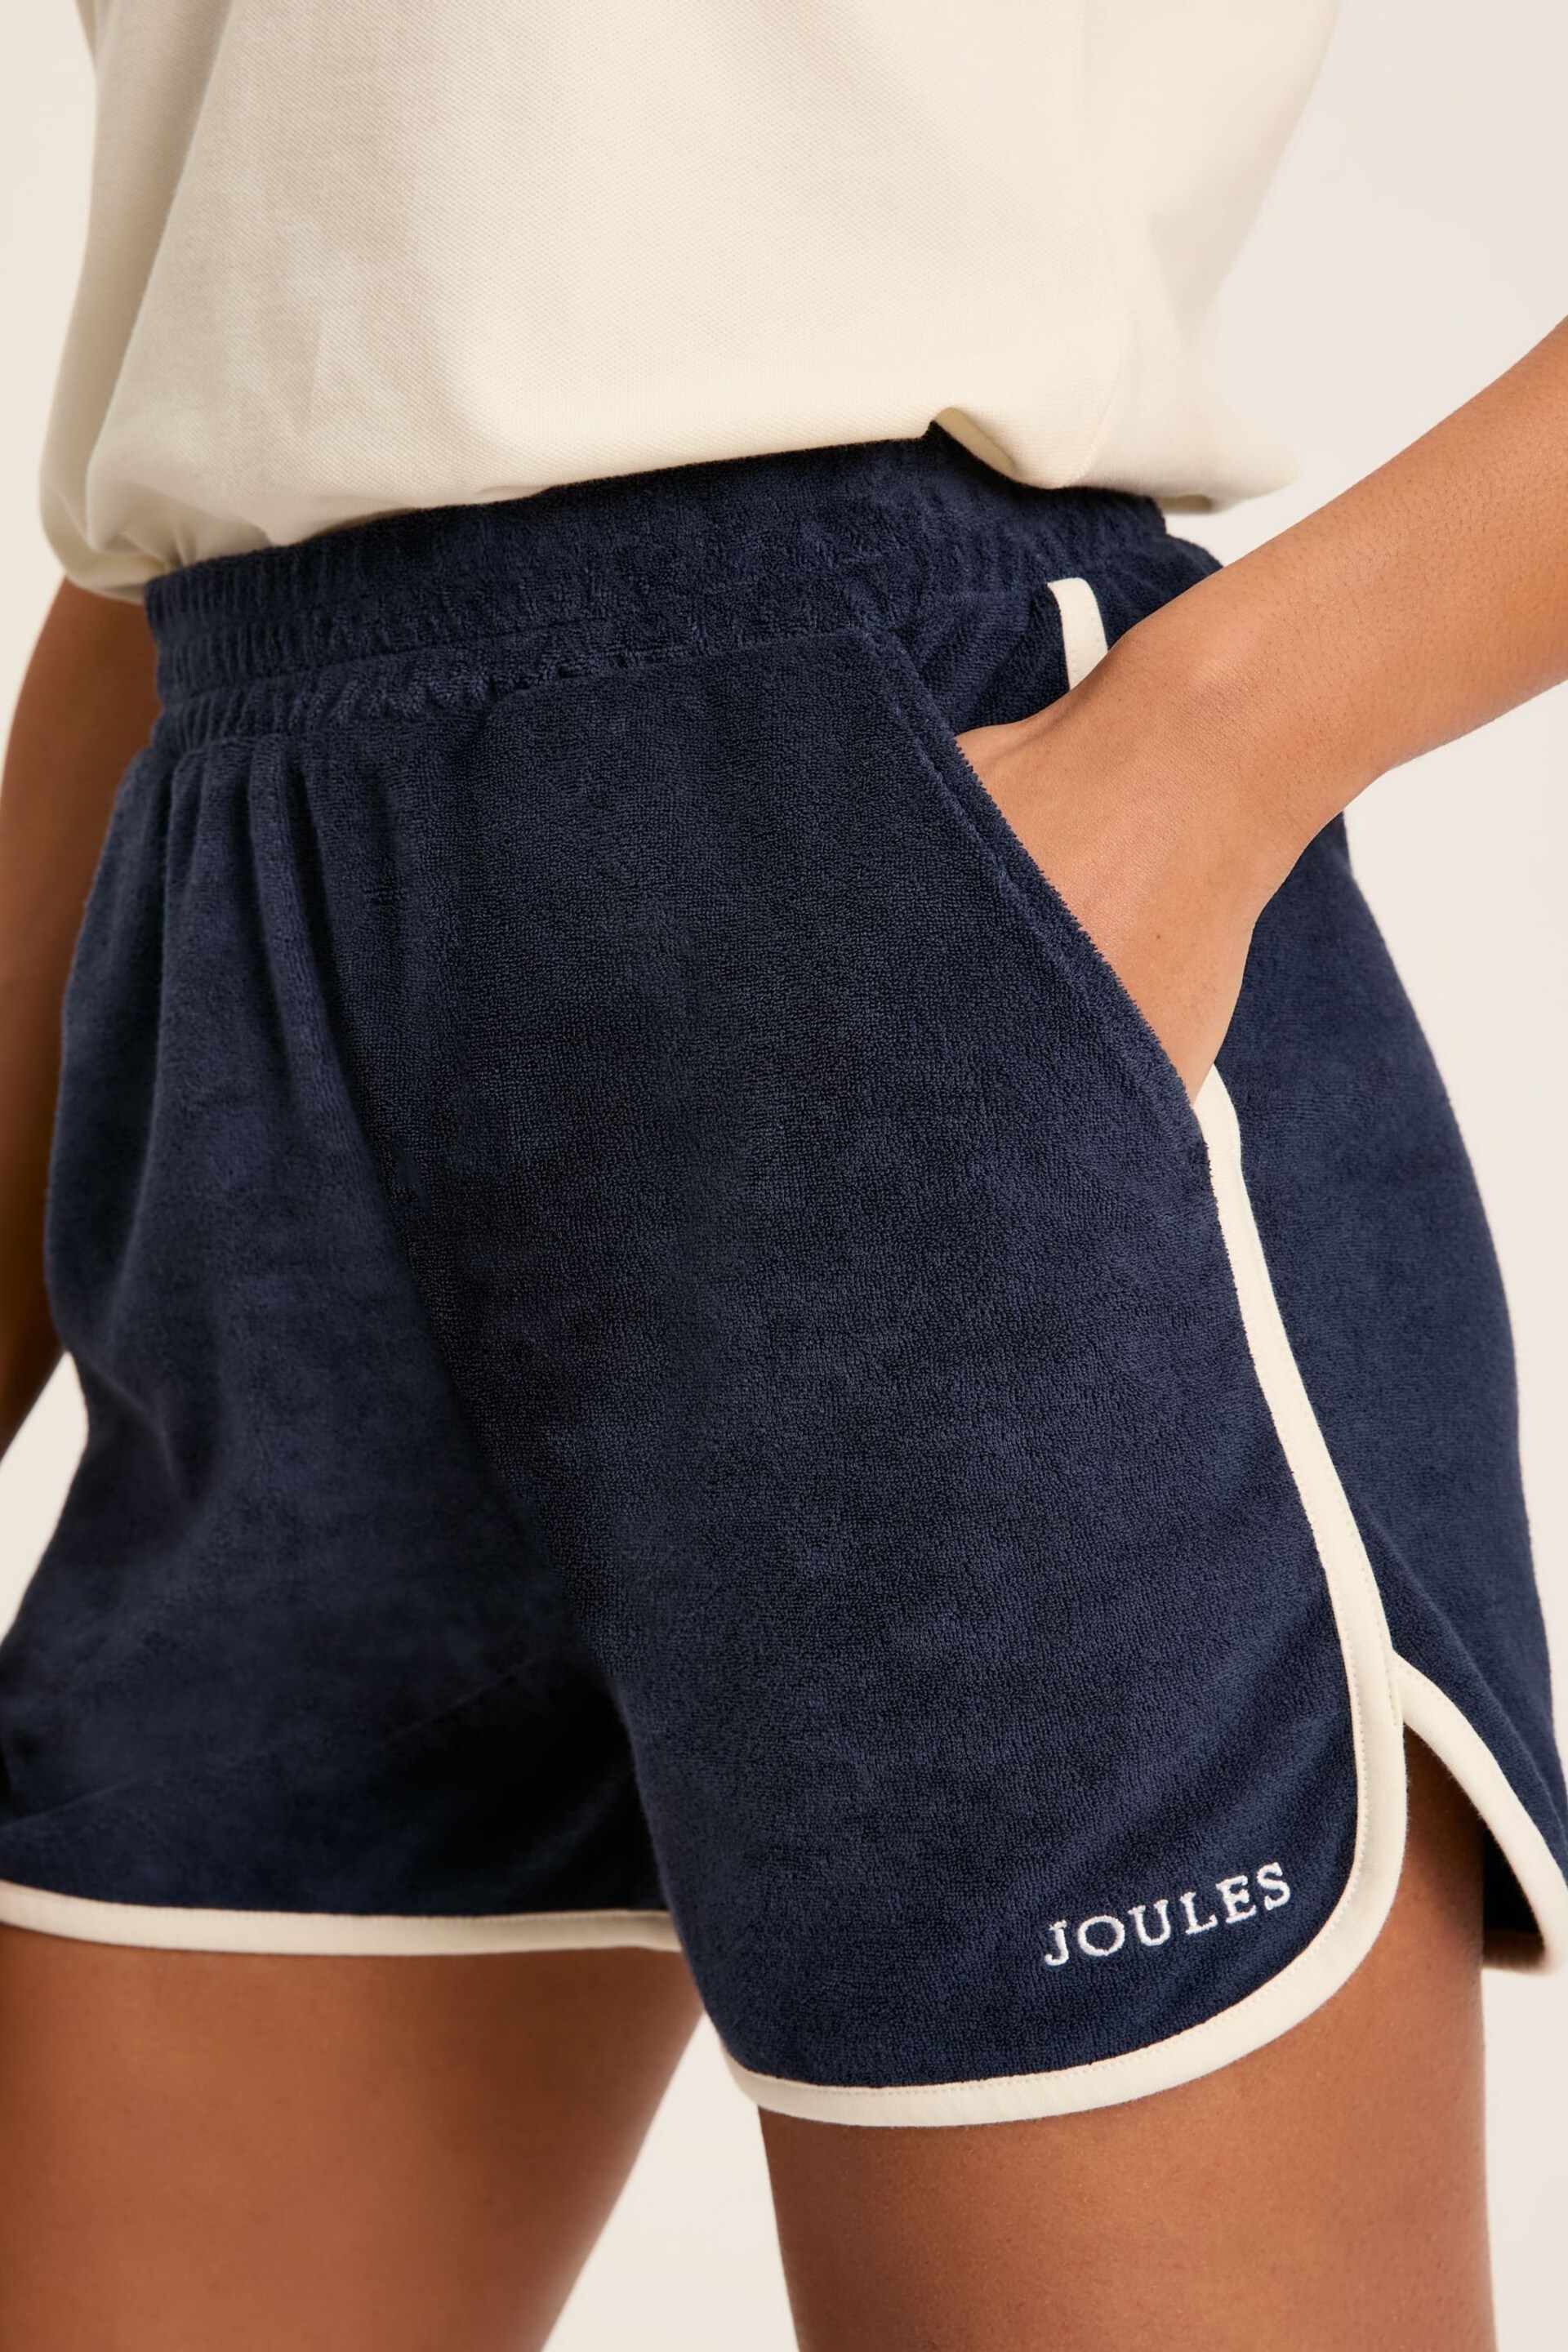 Joules Navy Blue Kingsley Towelling Shorts - Image 4 of 6